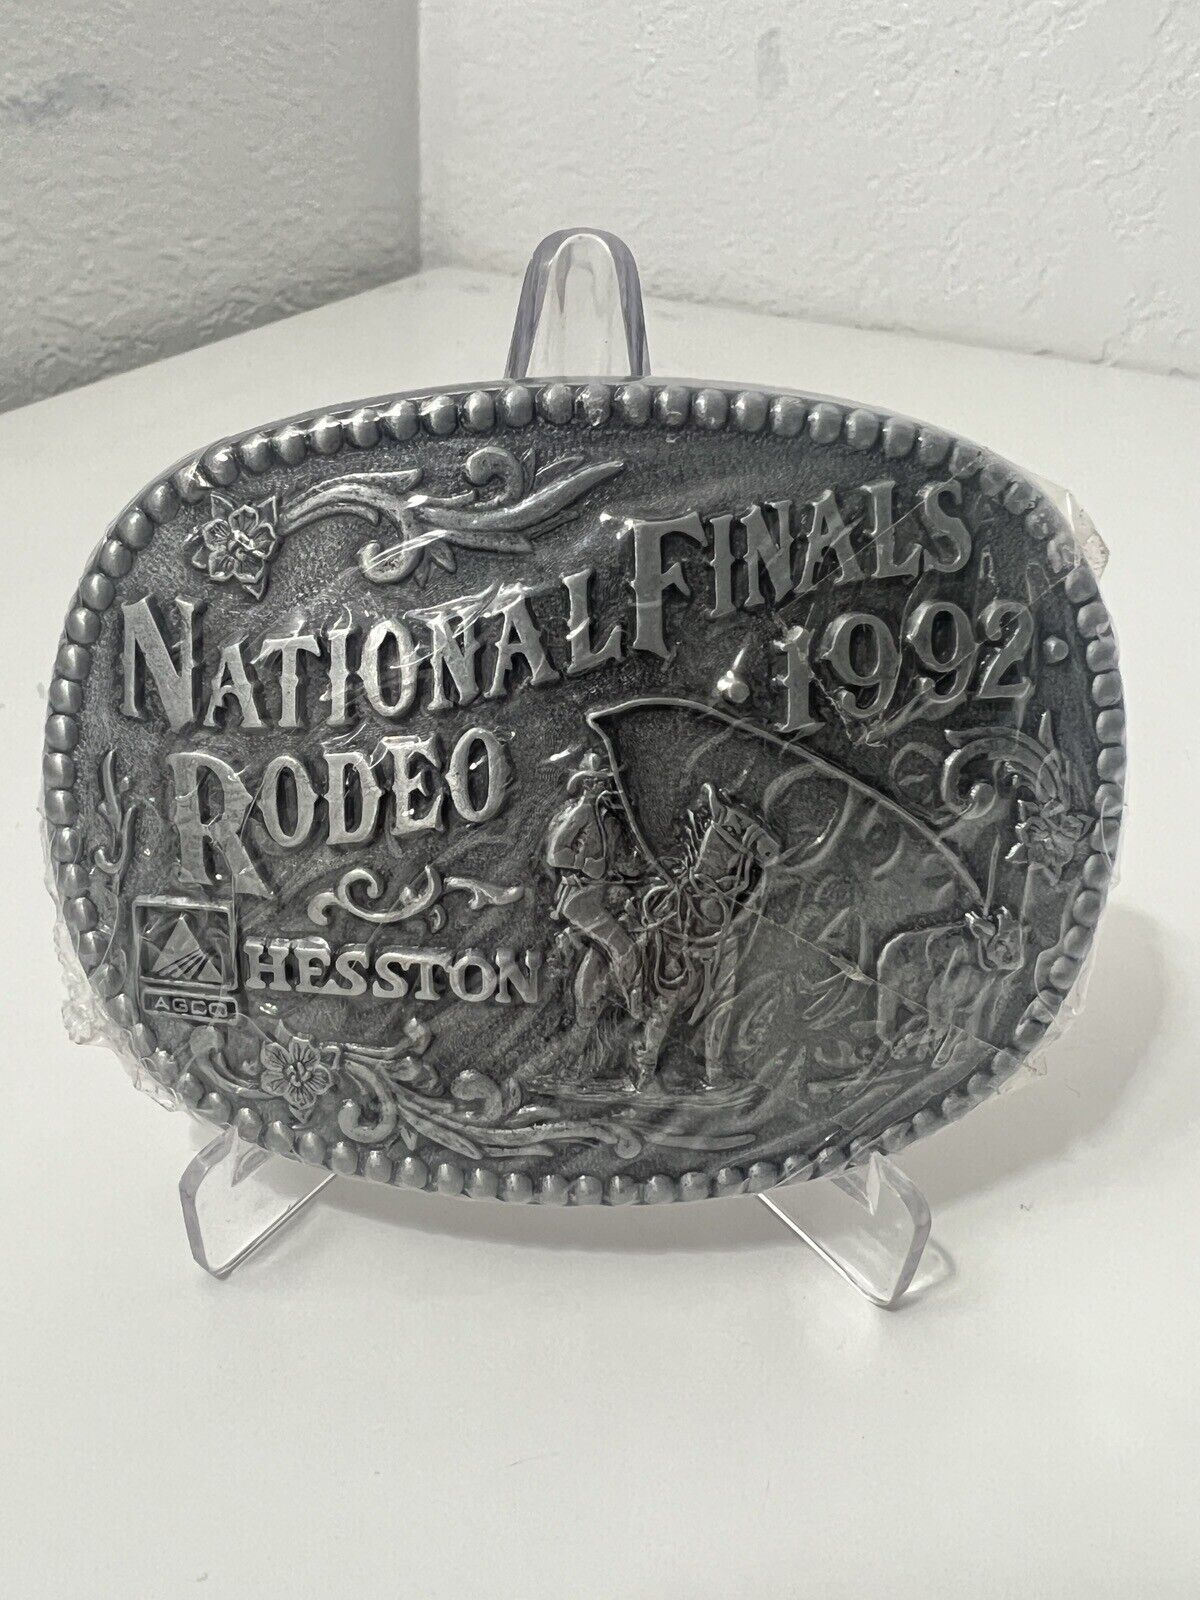 National Finals Rodeo Hesston Large Belt Buckle 1992